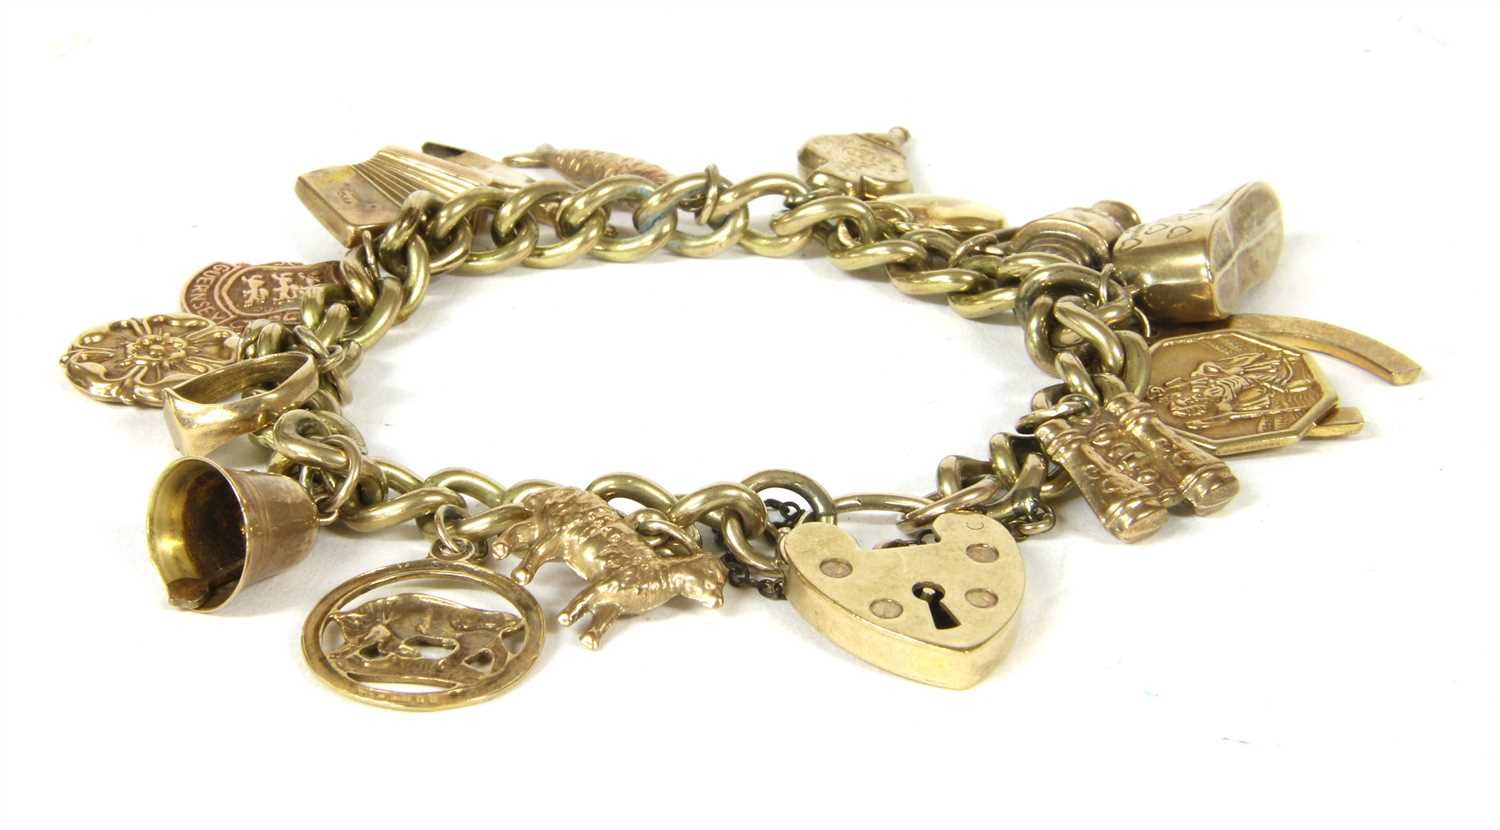 Lot 4 - A rolled gold curb chain bracelet